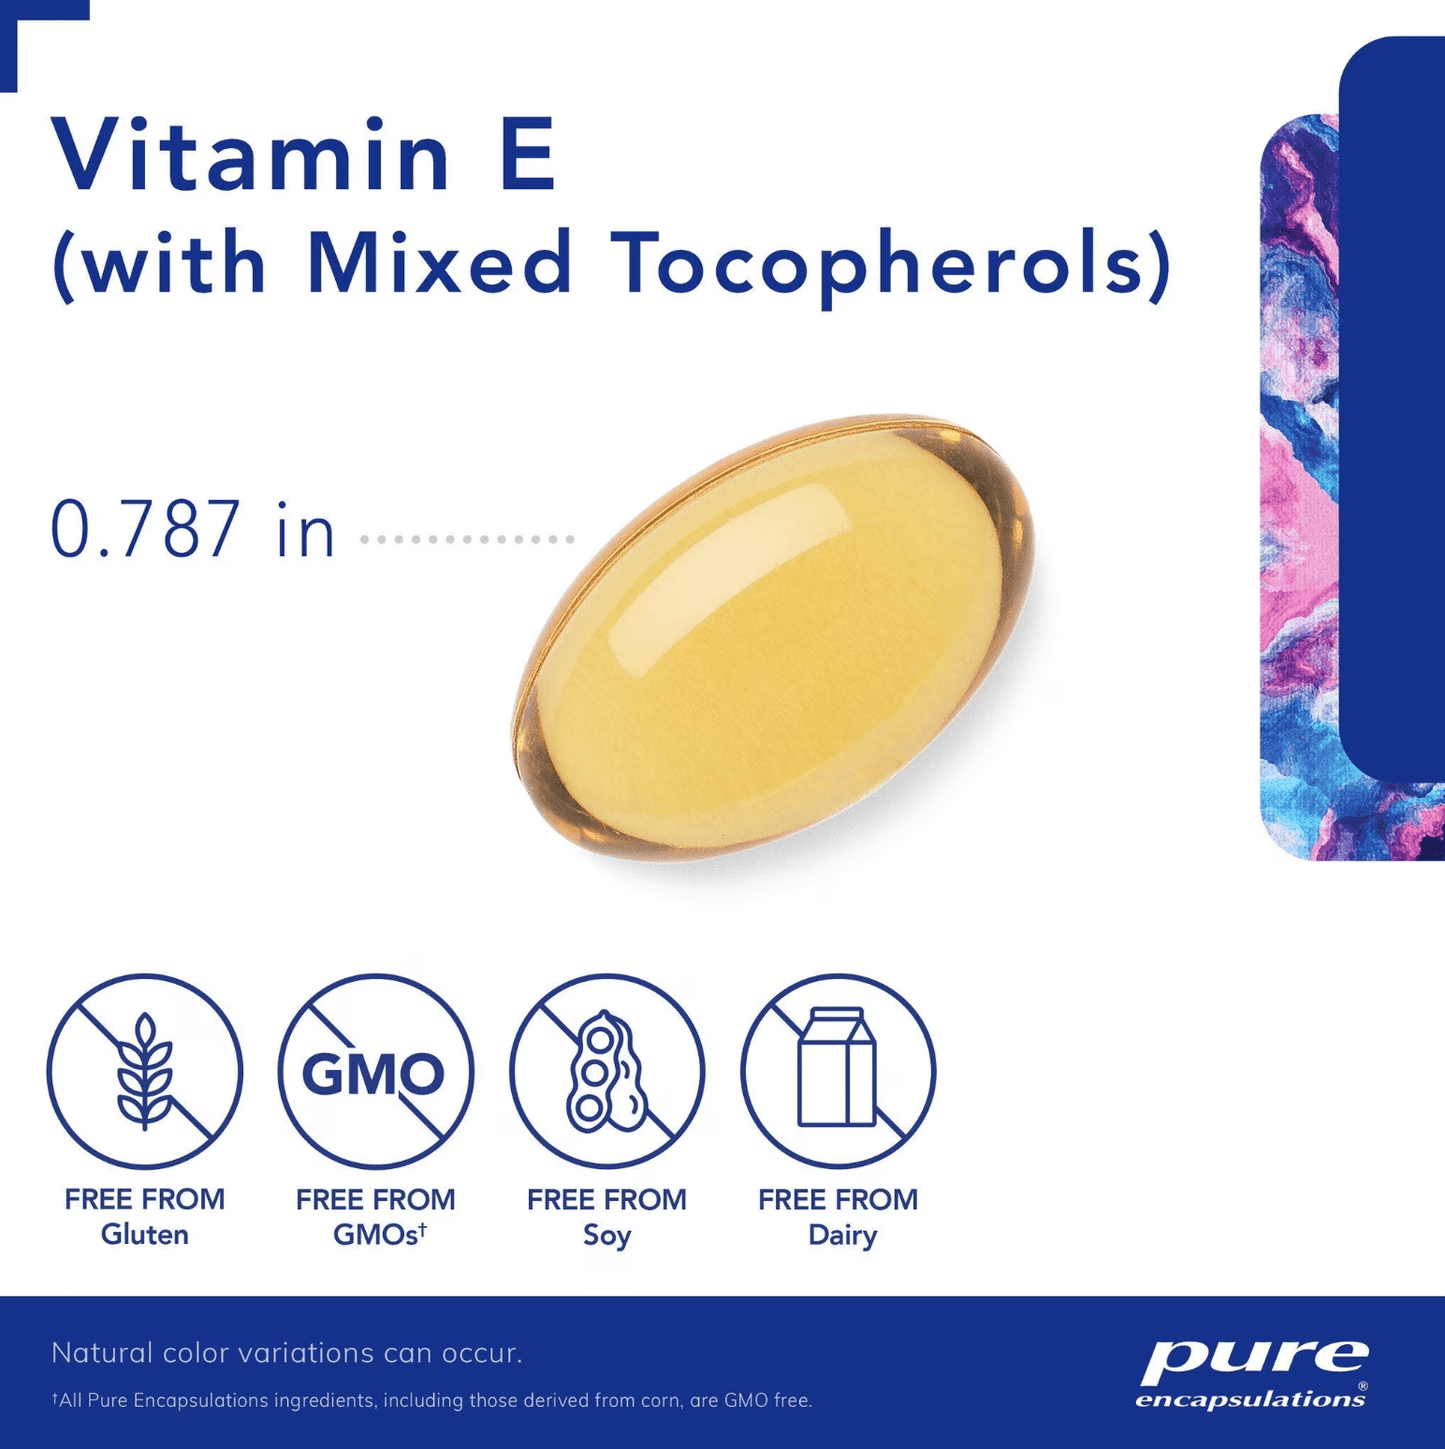 Pure Encapsulations Vitamin E with mixed tocopherols capsules